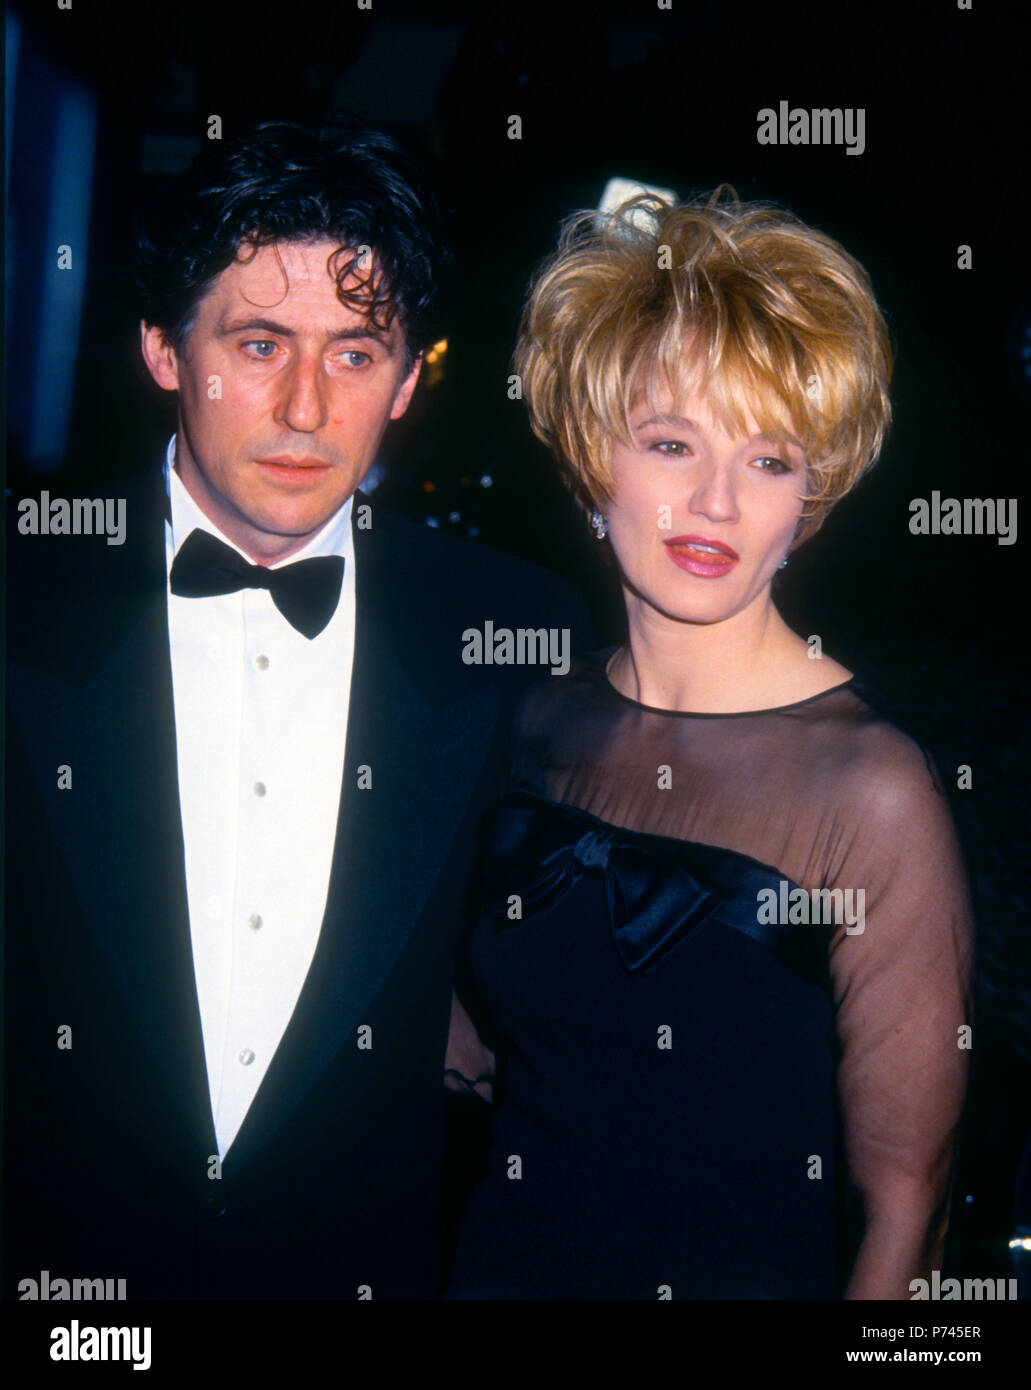 BEVERLY HILLS, CA - JANUARY 18: (L-R) Actor Gabriel Byrne and wife actress Ellen Barkin attend the 49th Annual Golden Globe Awards on January 19, 1992 at the Beverly Hilton Hotel in Beverly Hills, California. Photo by Barry King/Alamy Stock Photo Stock Photo